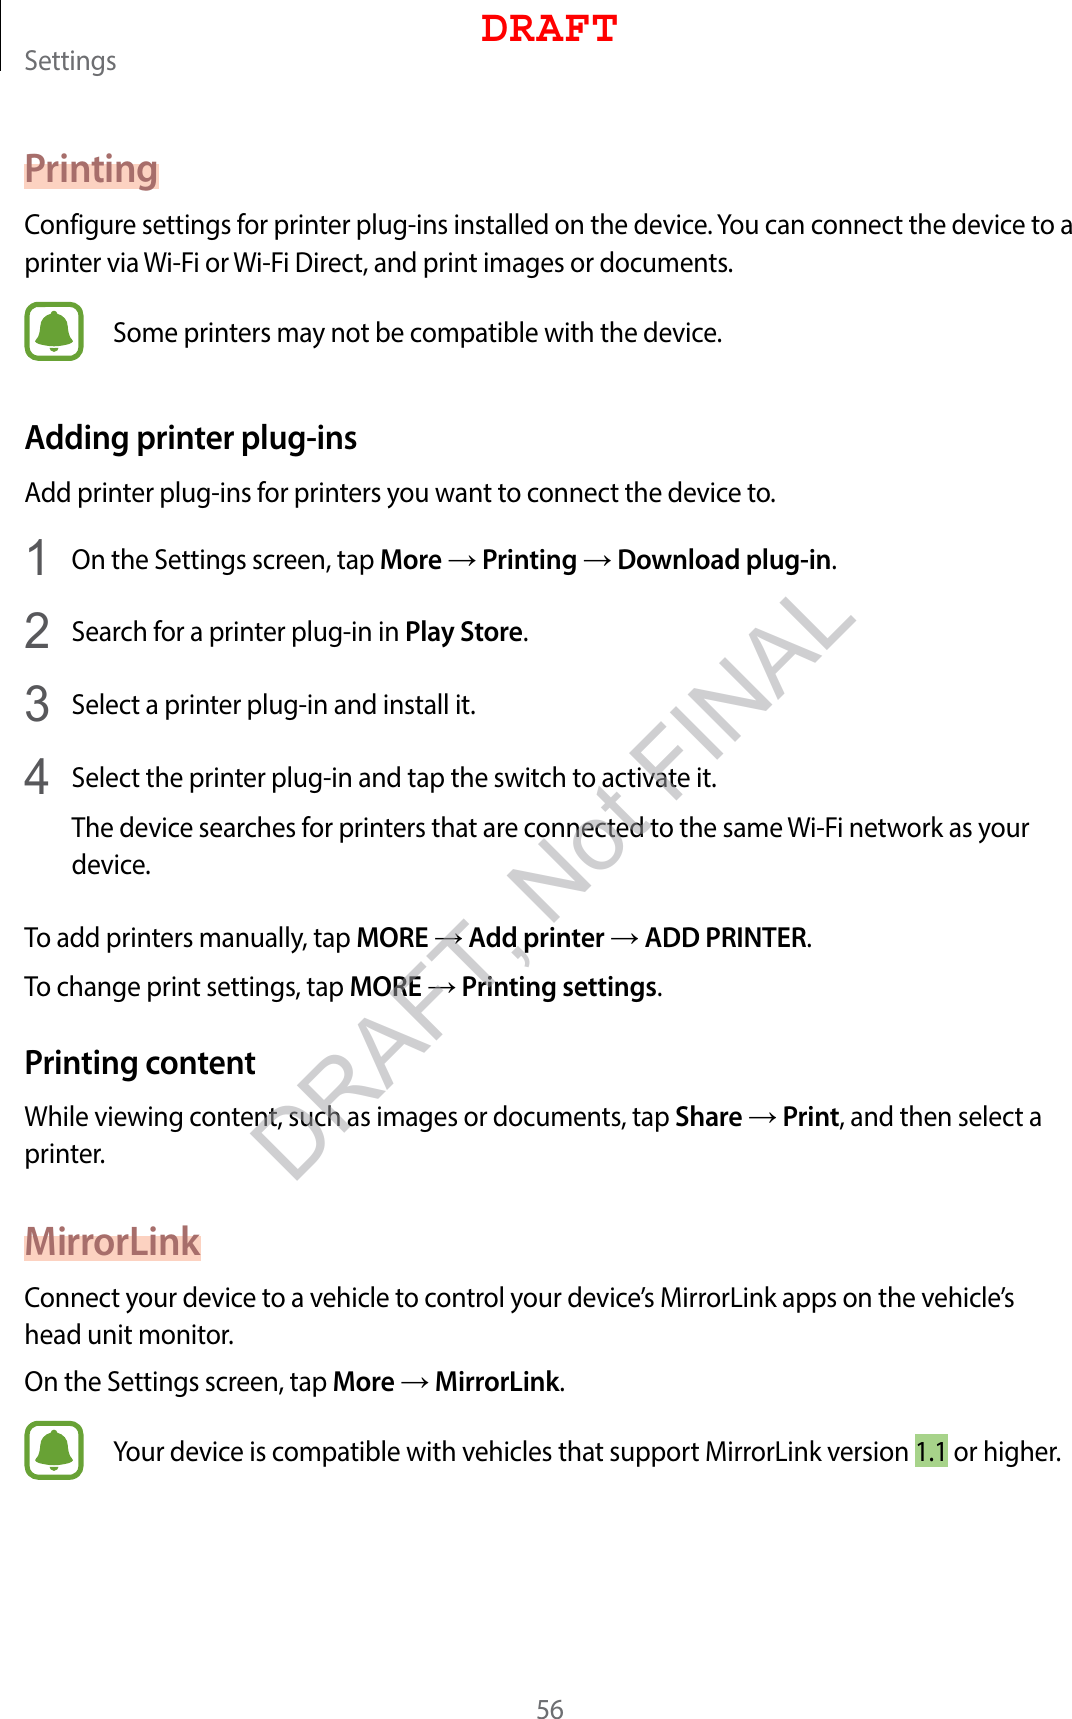 Settings56PrintingConfigure settings for printer plug-ins installed on the device. You can connect the device to a printer via Wi-Fi or Wi-Fi Direct, and print images or documents.Some printers may not be compatible with the device.Adding printer plug-insAdd printer plug-ins for printers you want to connect the device to.1  On the Settings screen, tap More → Printing → Download plug-in.2  Search for a printer plug-in in Play Store.3  Select a printer plug-in and install it.4  Select the printer plug-in and tap the switch to activate it.The device searches for printers that are connected to the same Wi-Fi network as your device.To add printers manually, tap MORE → Add printer → ADD PRINTER.To change print settings, tap MORE → Printing settings.Printing contentWhile viewing content, such as images or documents, tap Share → Print, and then select a printer.MirrorLinkConnect your device to a vehicle to control your device’s MirrorLink apps on the vehicle’s head unit monitor.On the Settings screen, tap More → MirrorLink.Your device is compatible with vehicles that support MirrorLink version 1.1 or higher.DRAFTDRAFT, Not FINAL